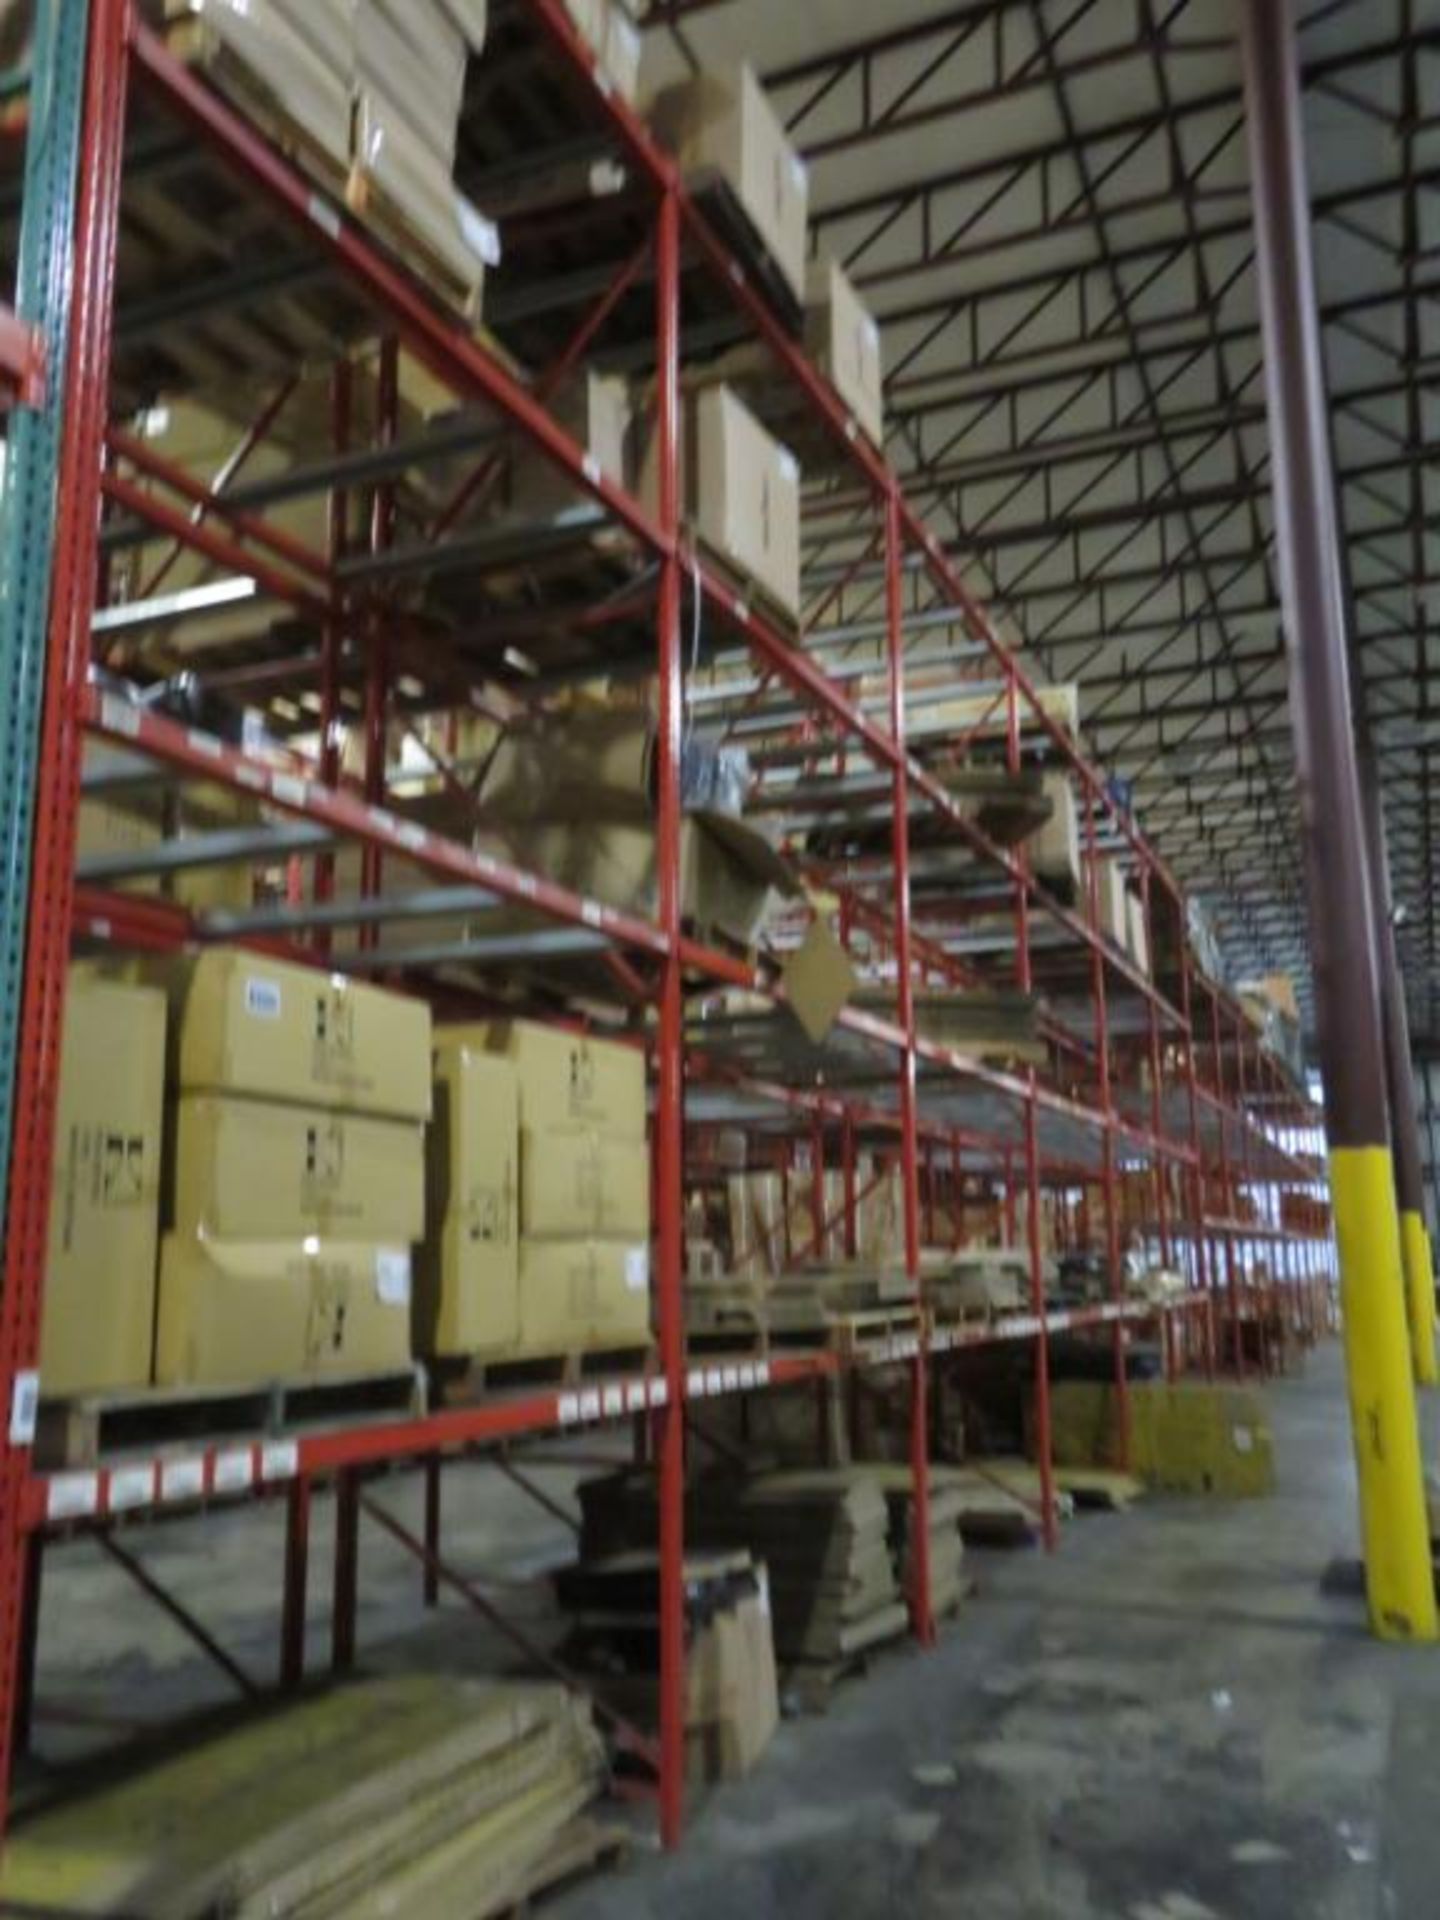 Paltier pallet racking 7 uprights 48" wide and 18' tall, 10 uprights 48" wide and 16' tall, 108